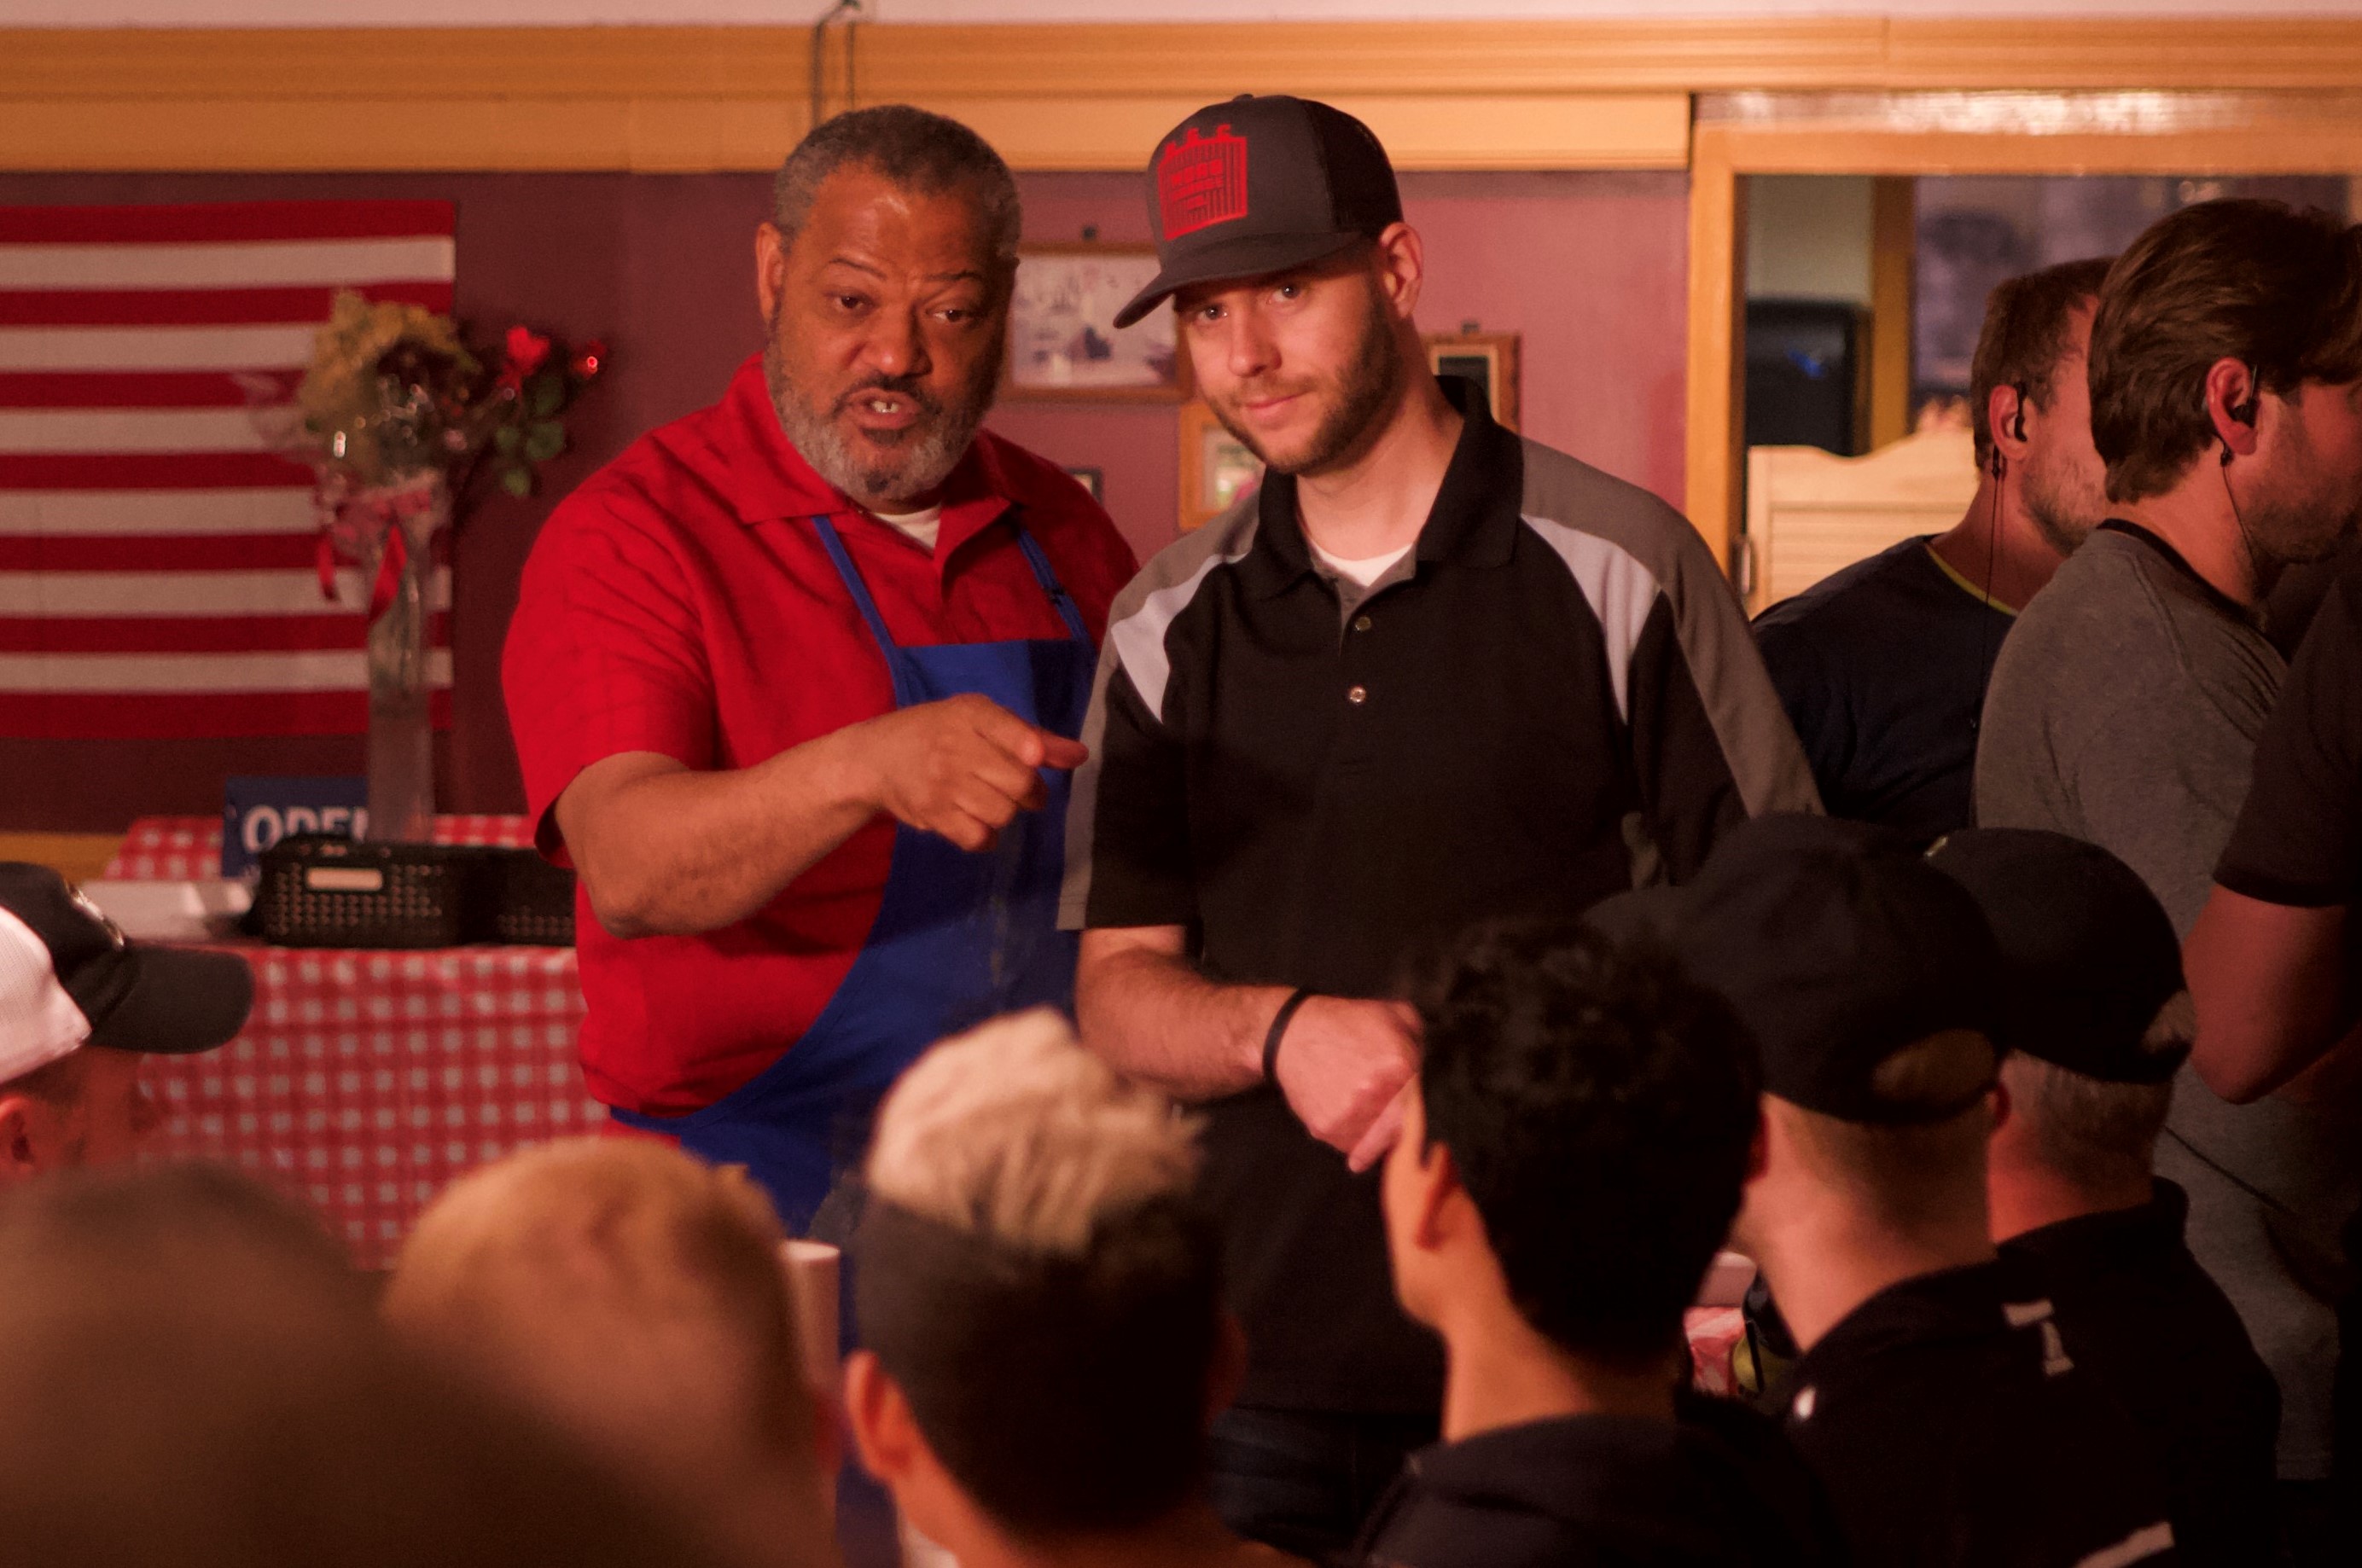 Actor Laurence Fishburne (left) and director Todd Randall (right)